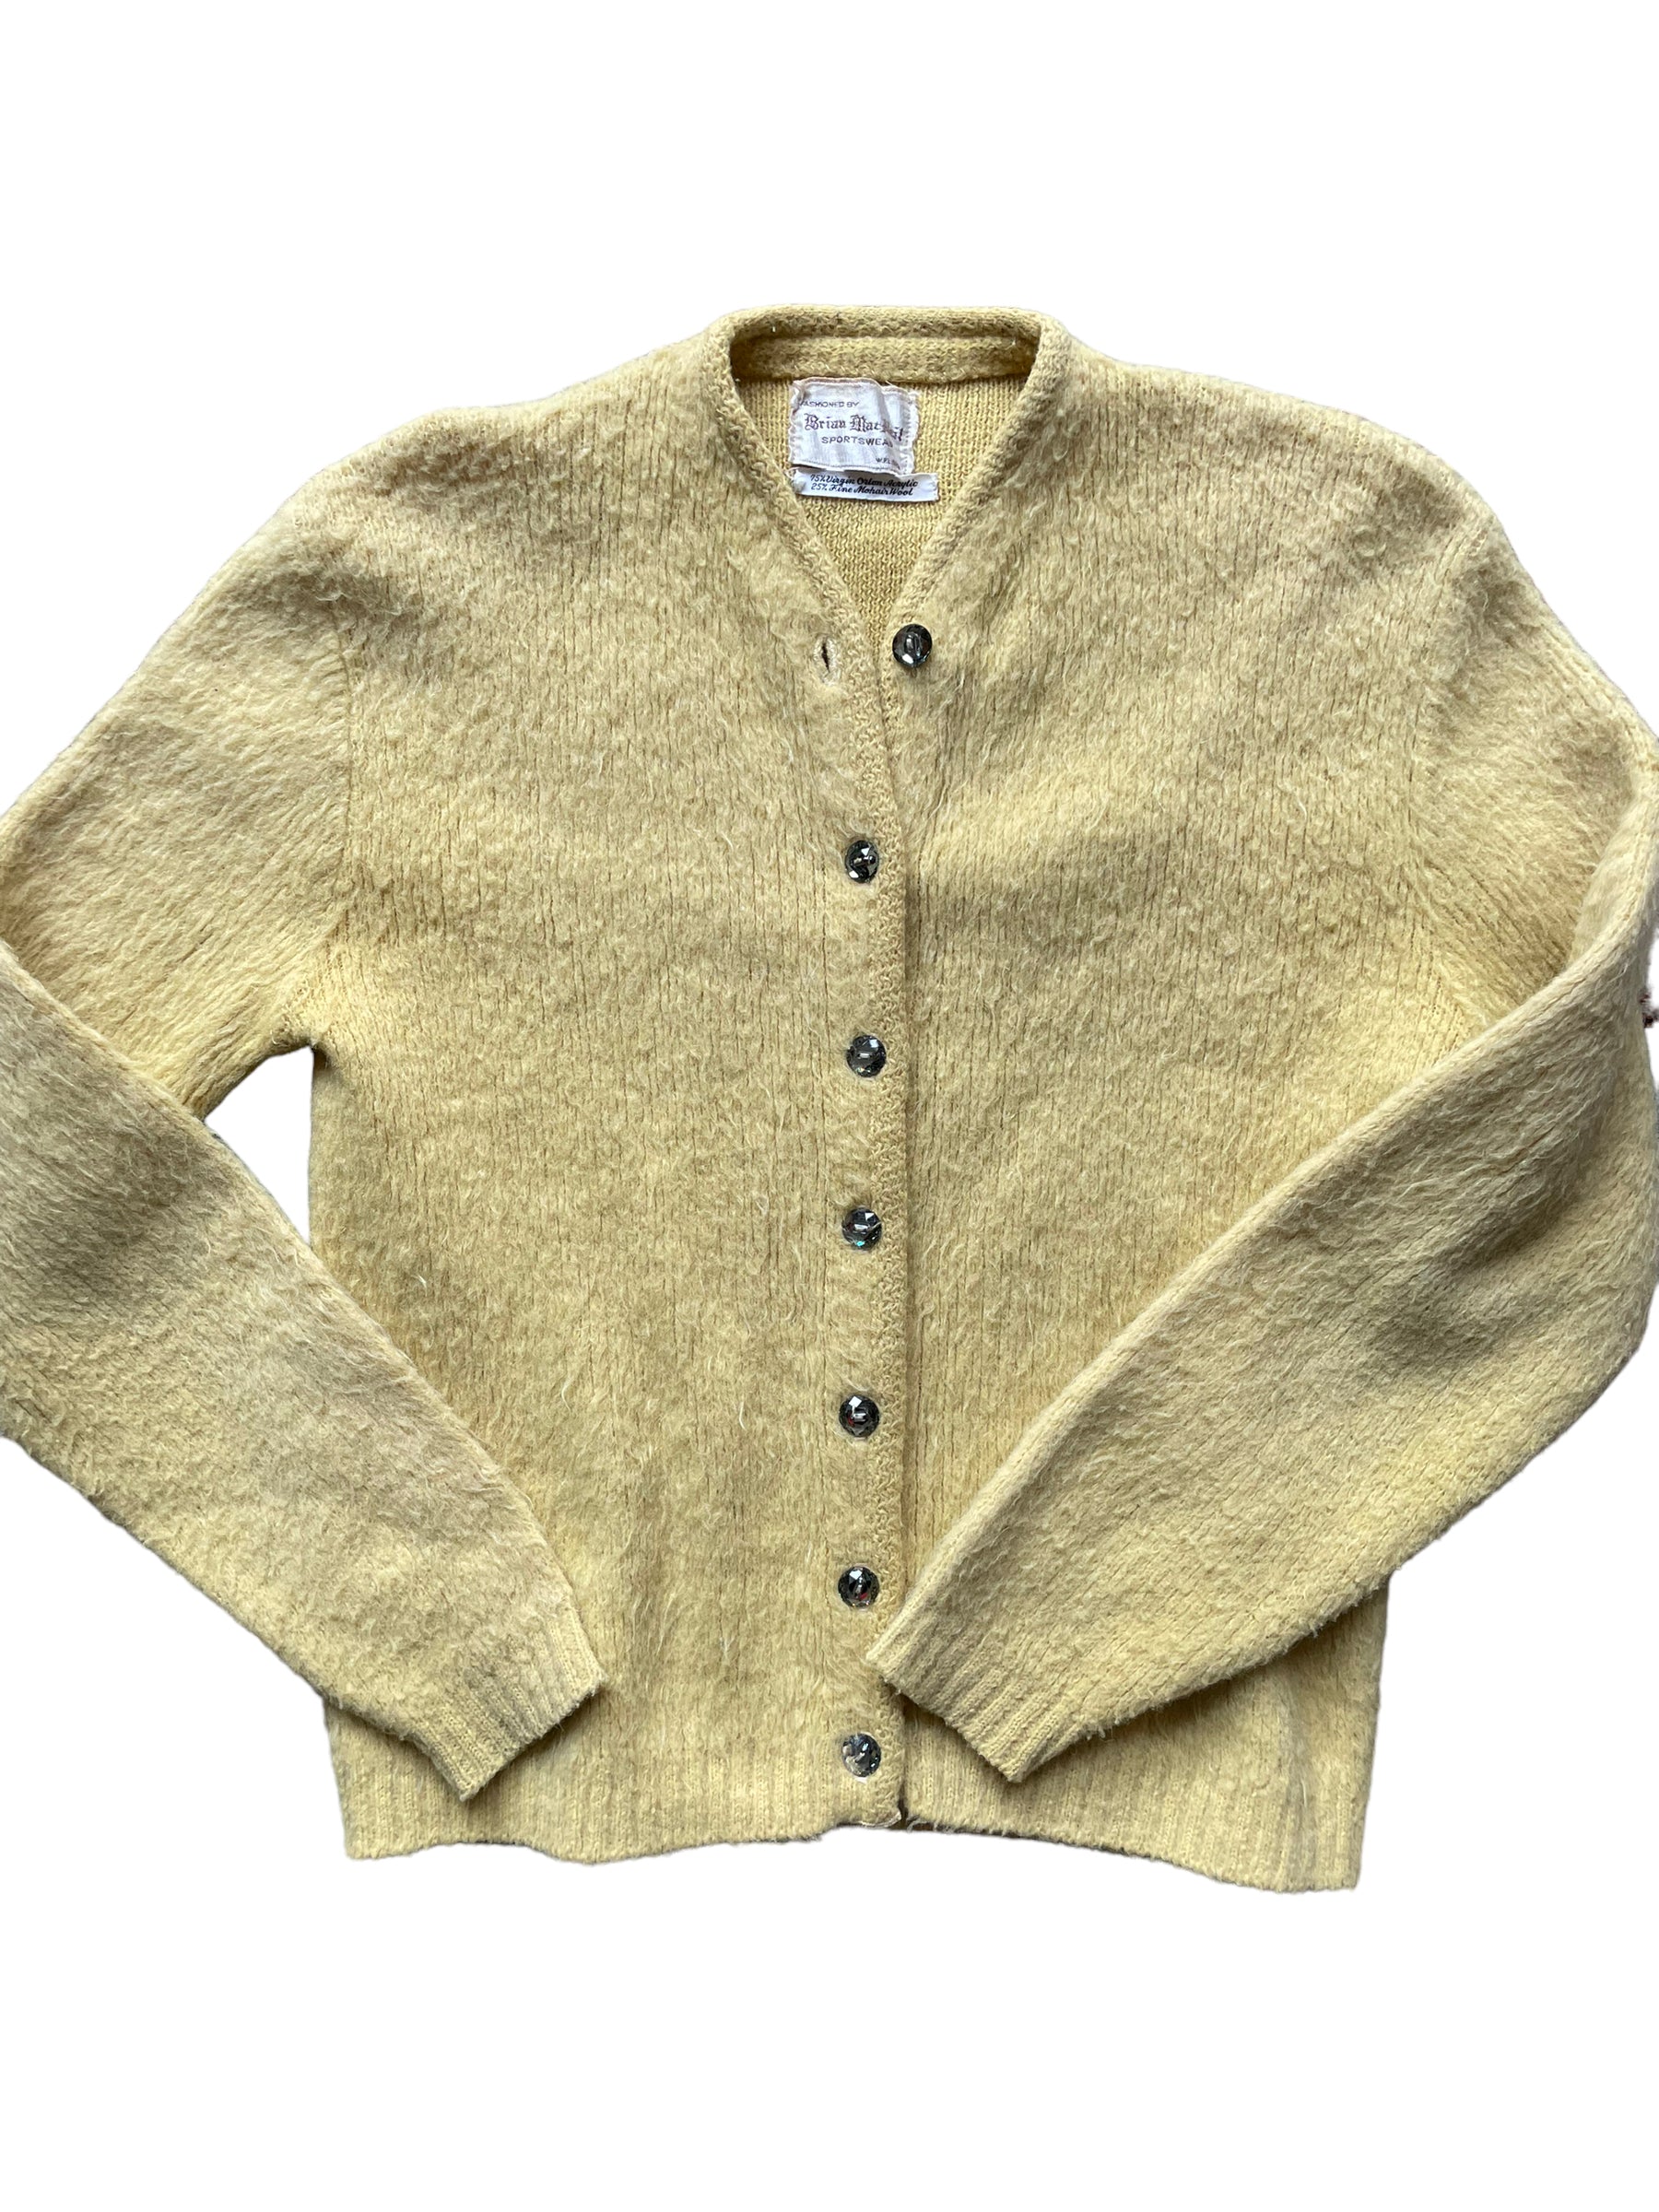 Front view of Vintage 1950s Yellow Orlon Mohair Cardigan | Barn Owl Sweaters | Seattle Vintage